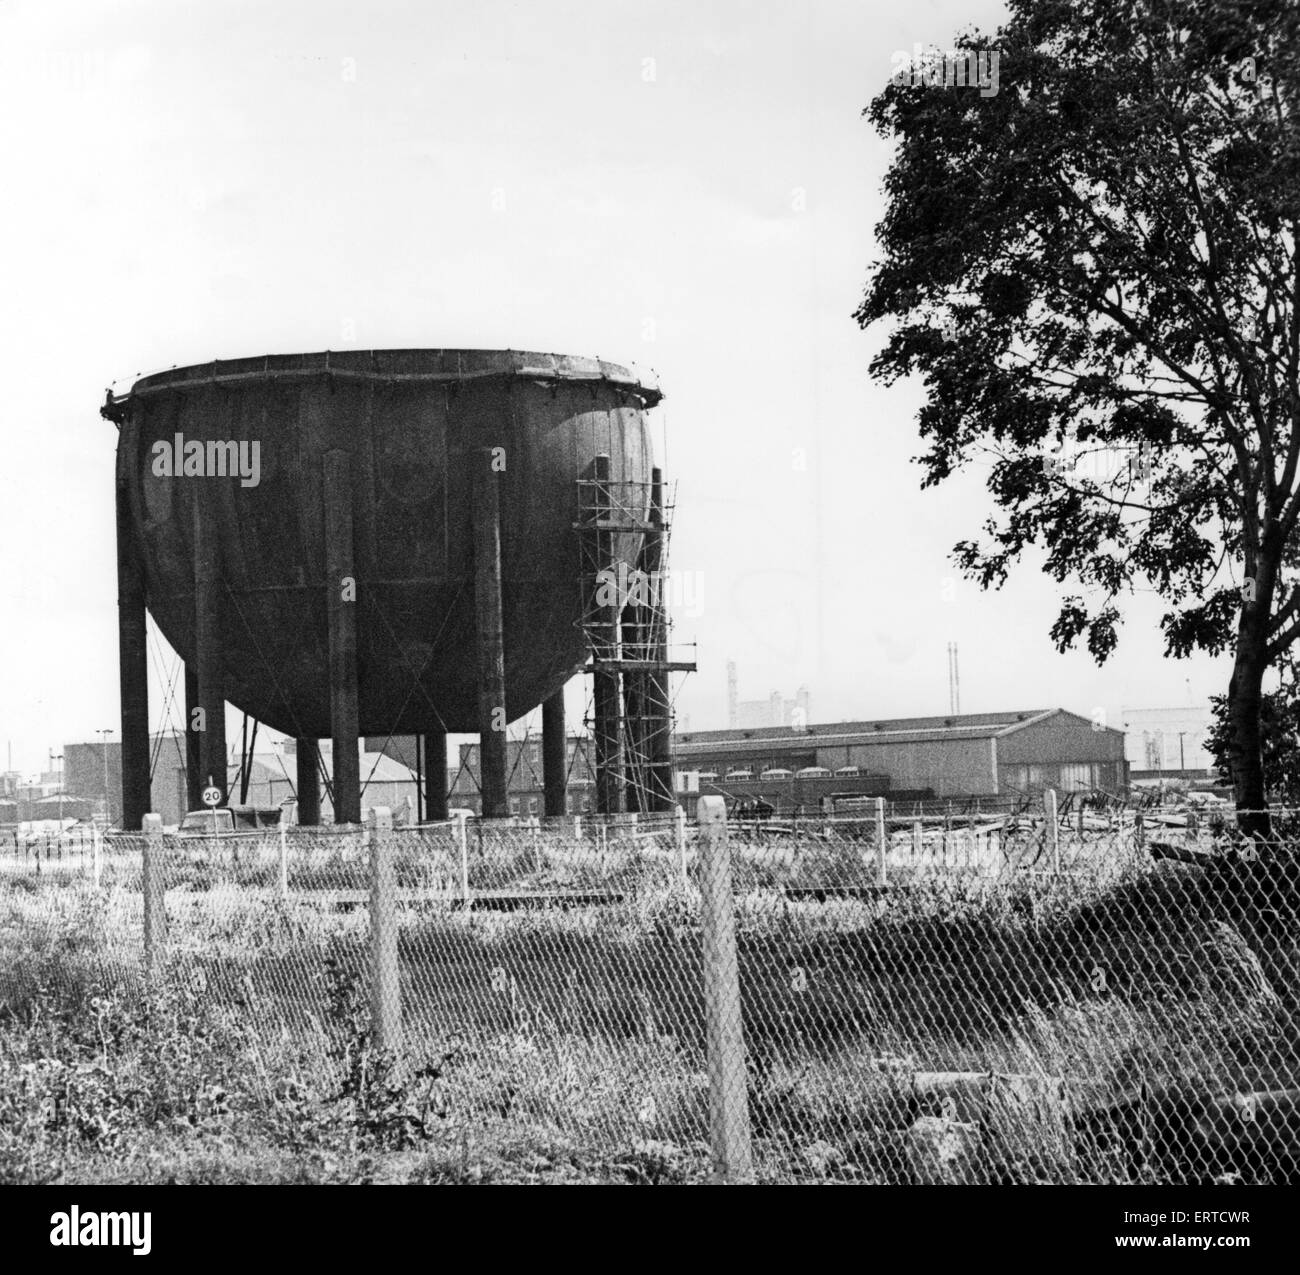 ICI, Wilton. The bottom half of a 5000 ton chemical storage tank being fitted into place. It will hold VCM, vinyl chloride monomer from new works being built opposite Lackenby Works on the Trunk Road. 25th September 1978. Stock Photo